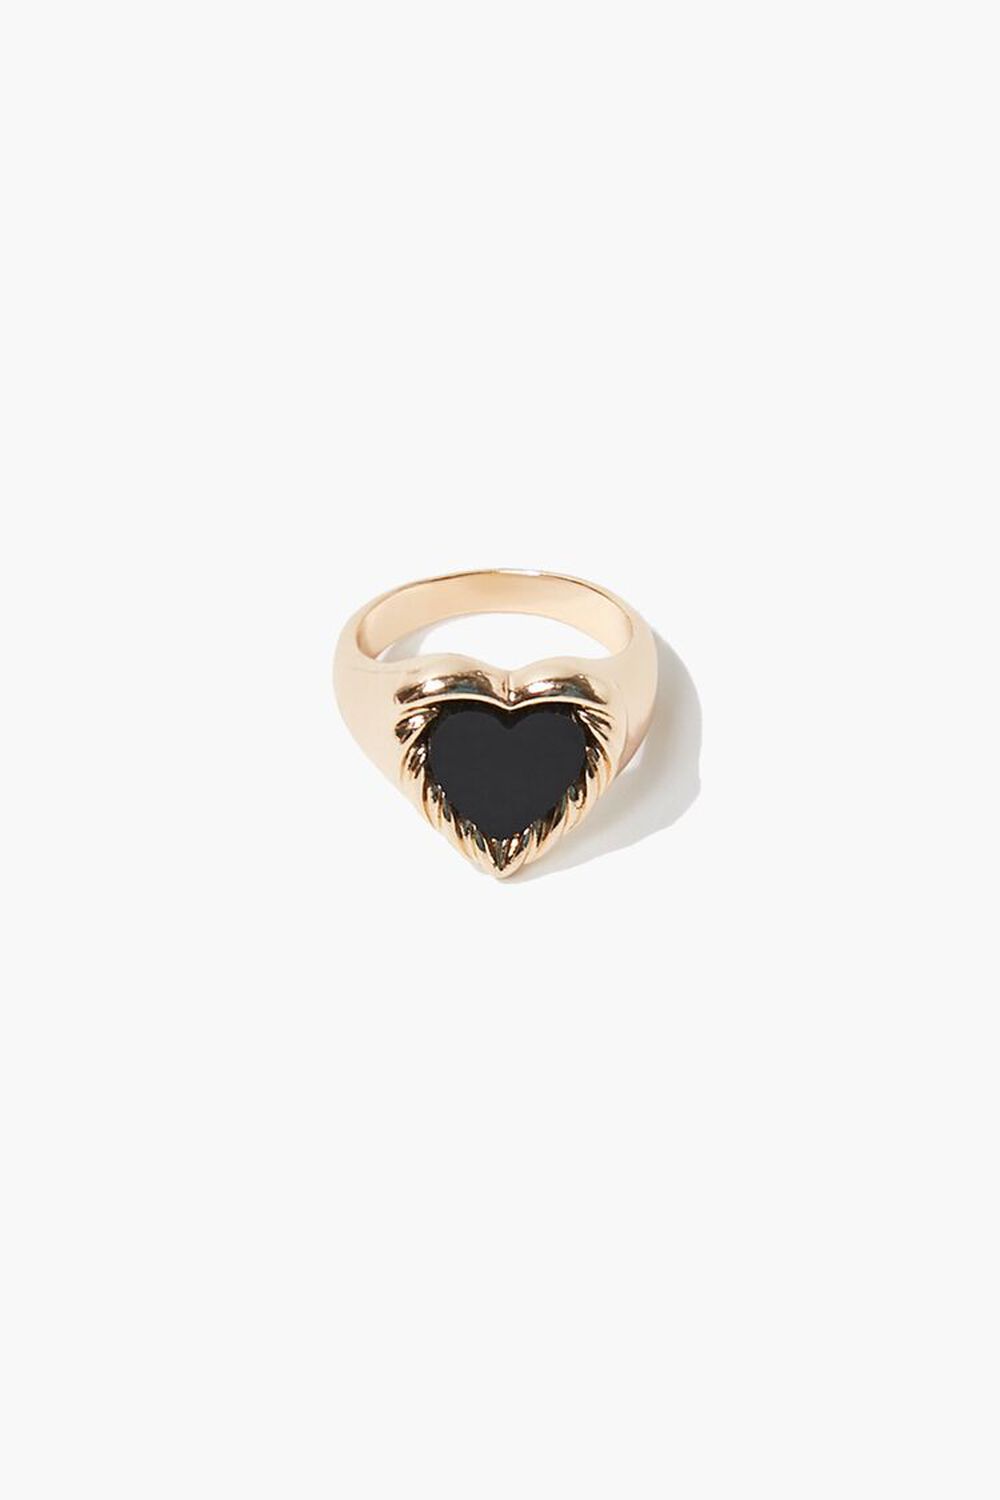 GOLD/BLACK Opaque Heart Cocktail Ring, image 1